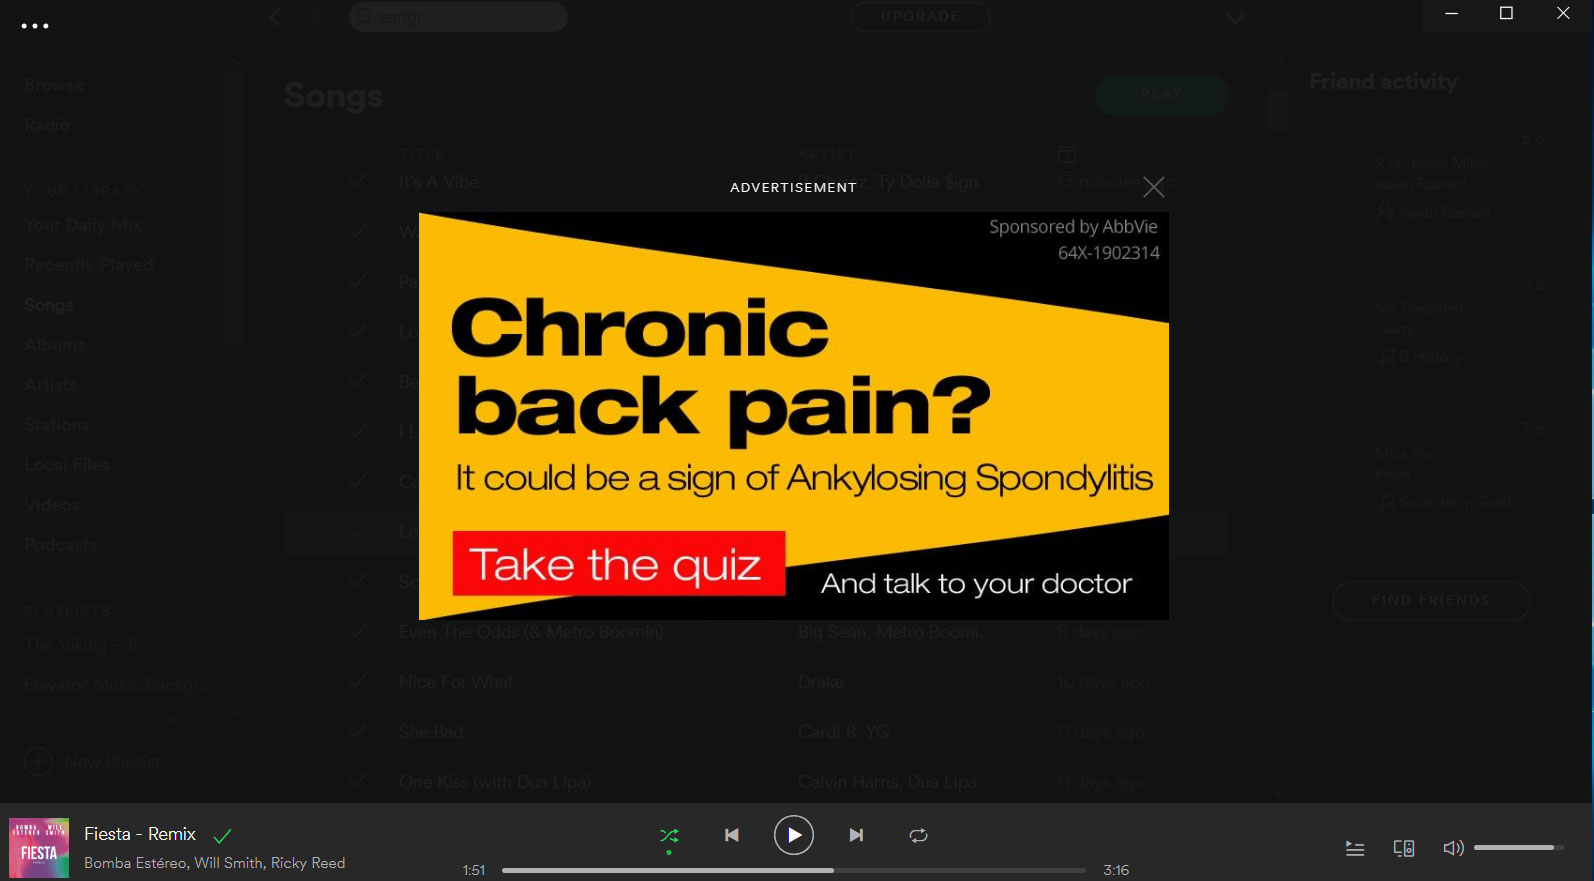 Pharma Ad Within Spotify - Unbranded Campaign from Abbvie